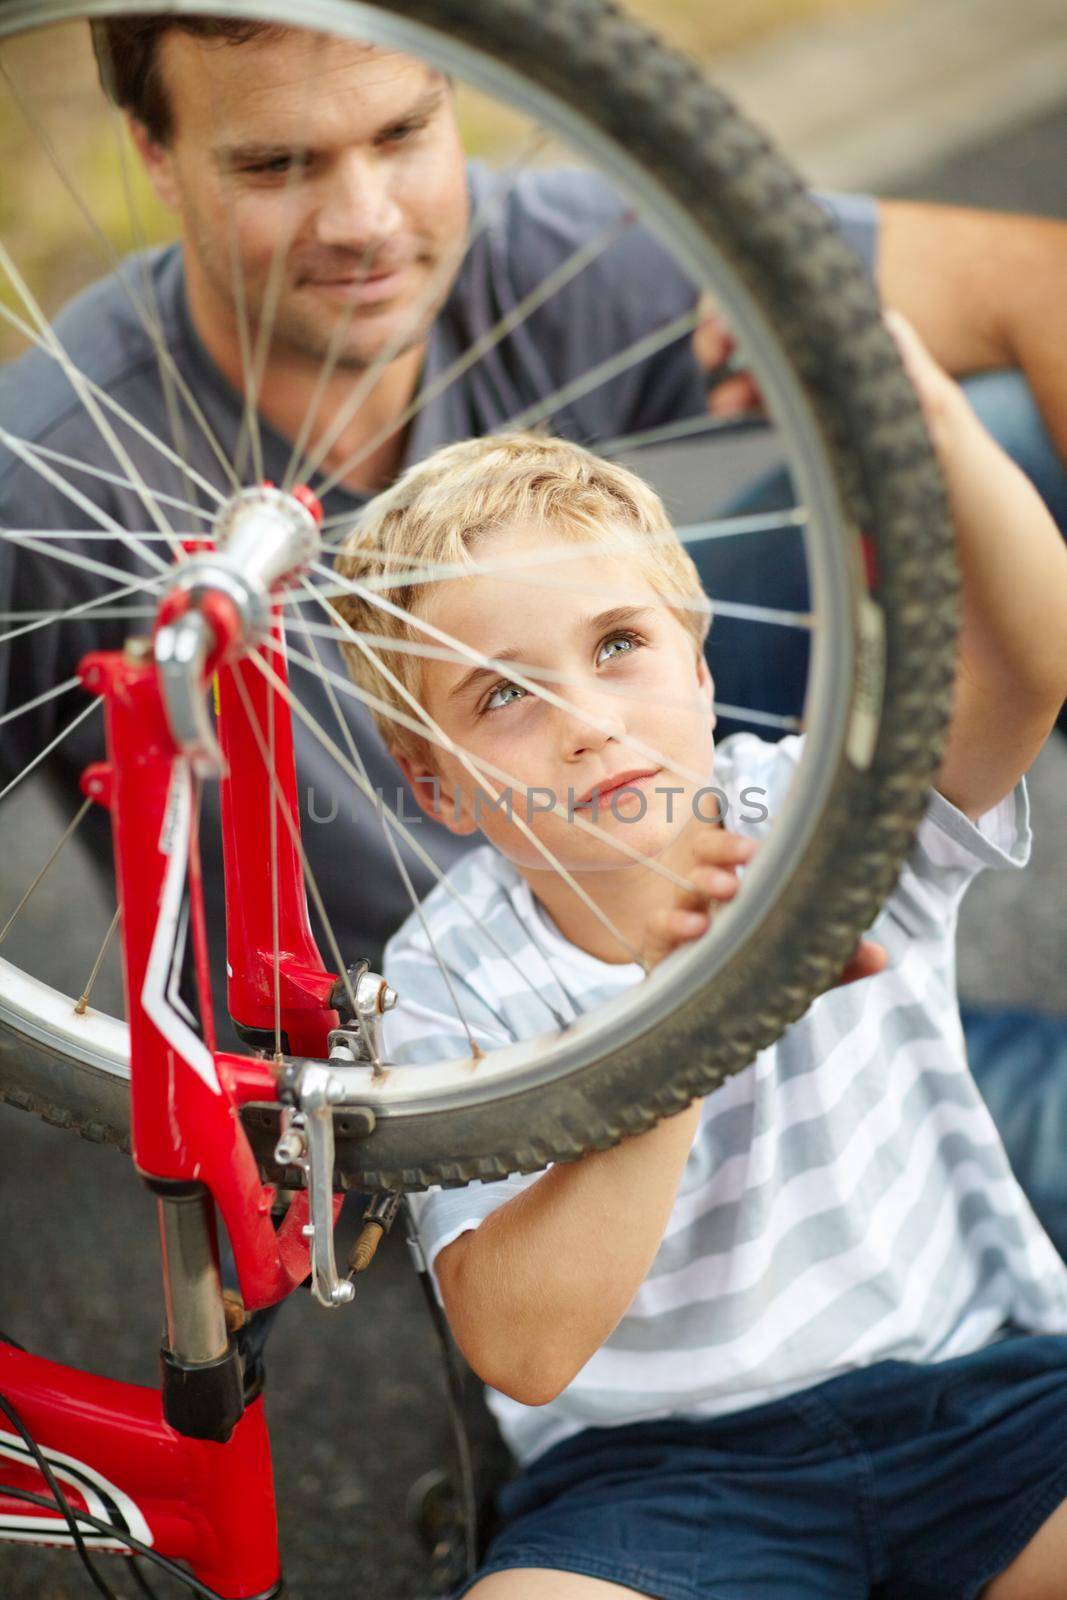 A new learnt skill he wont forget. Young father teaching his son how to change a bike puncture